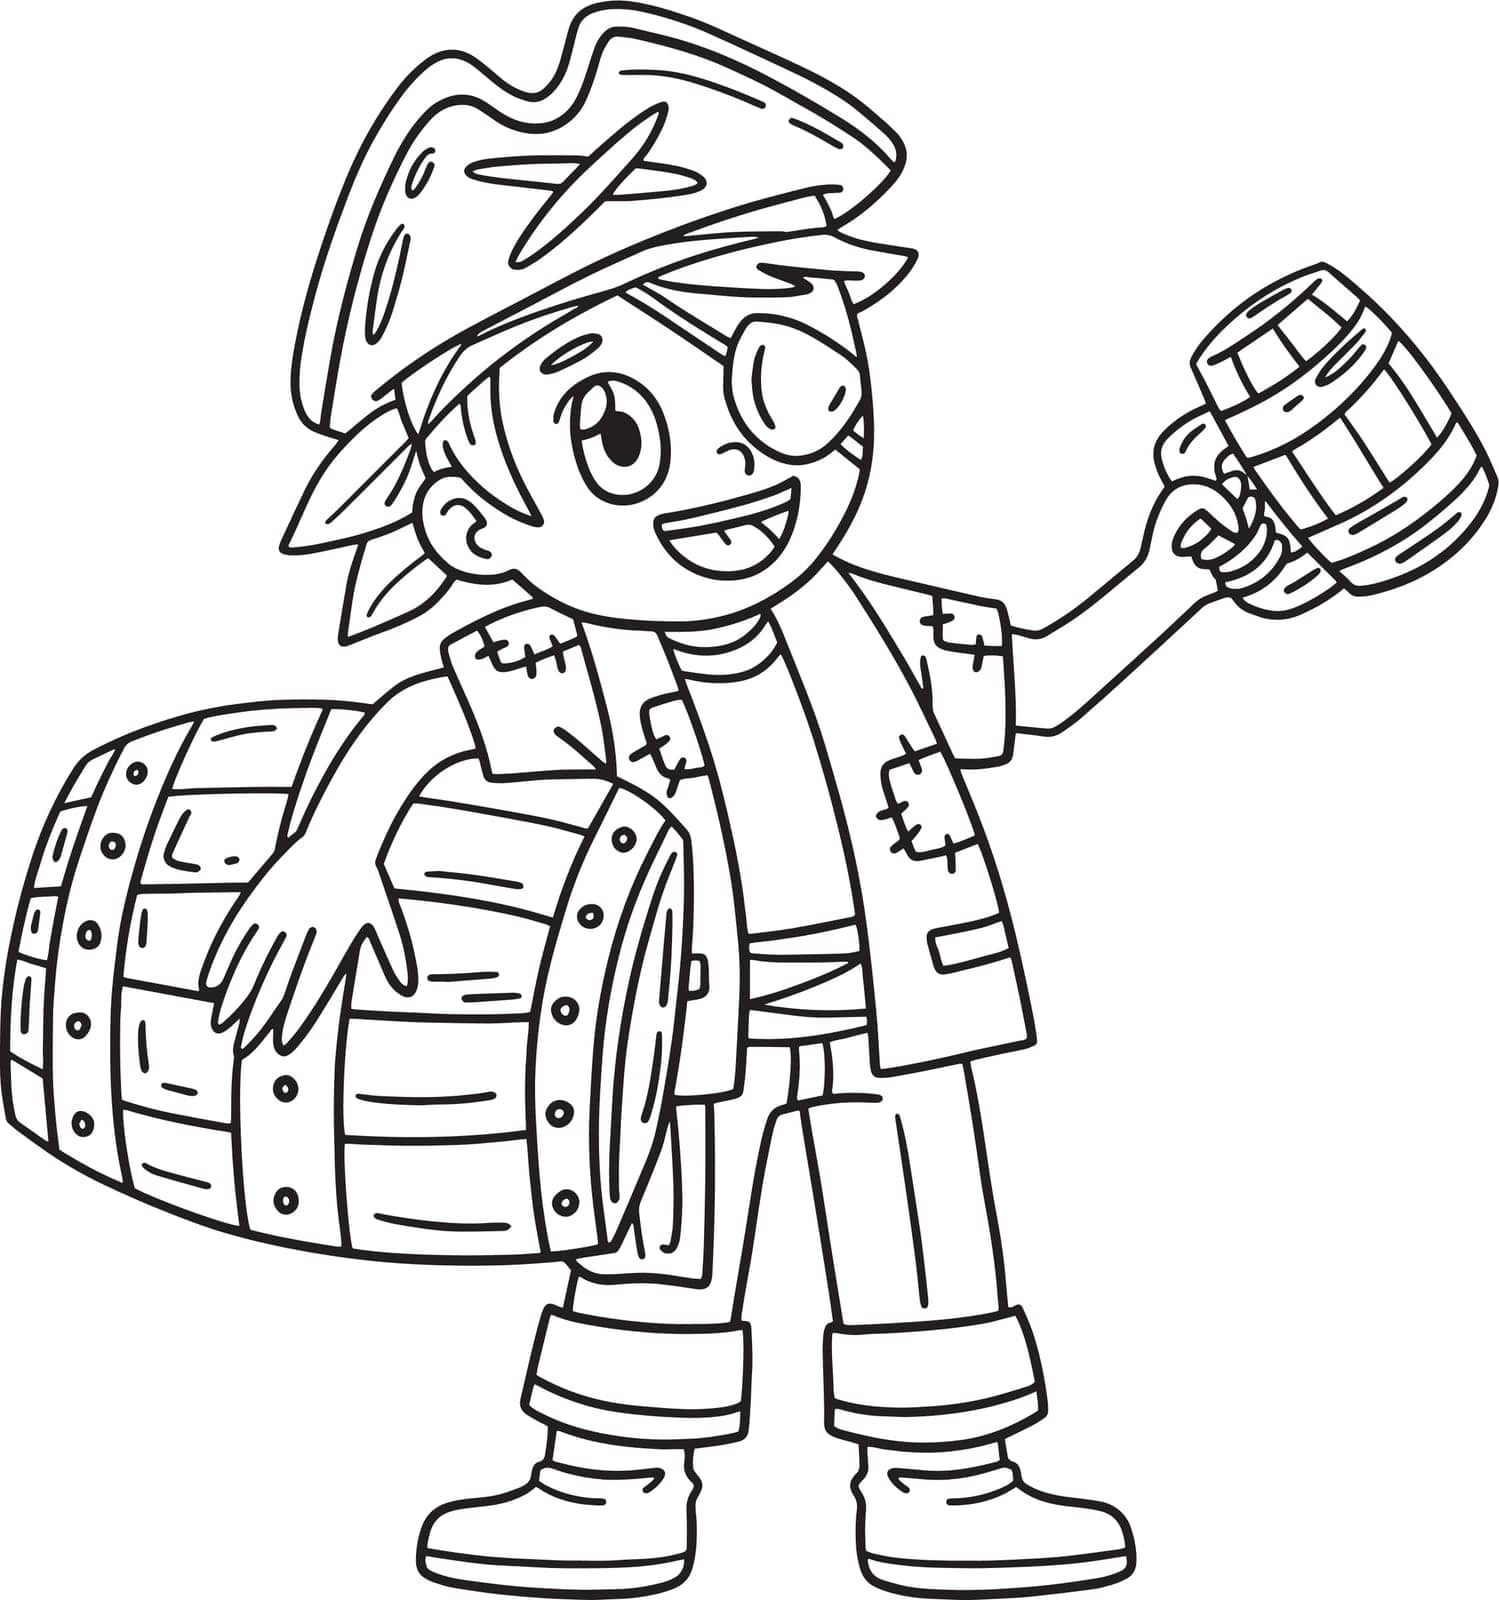 Pirate with Barrel of Rum Isolated Coloring Page by abbydesign